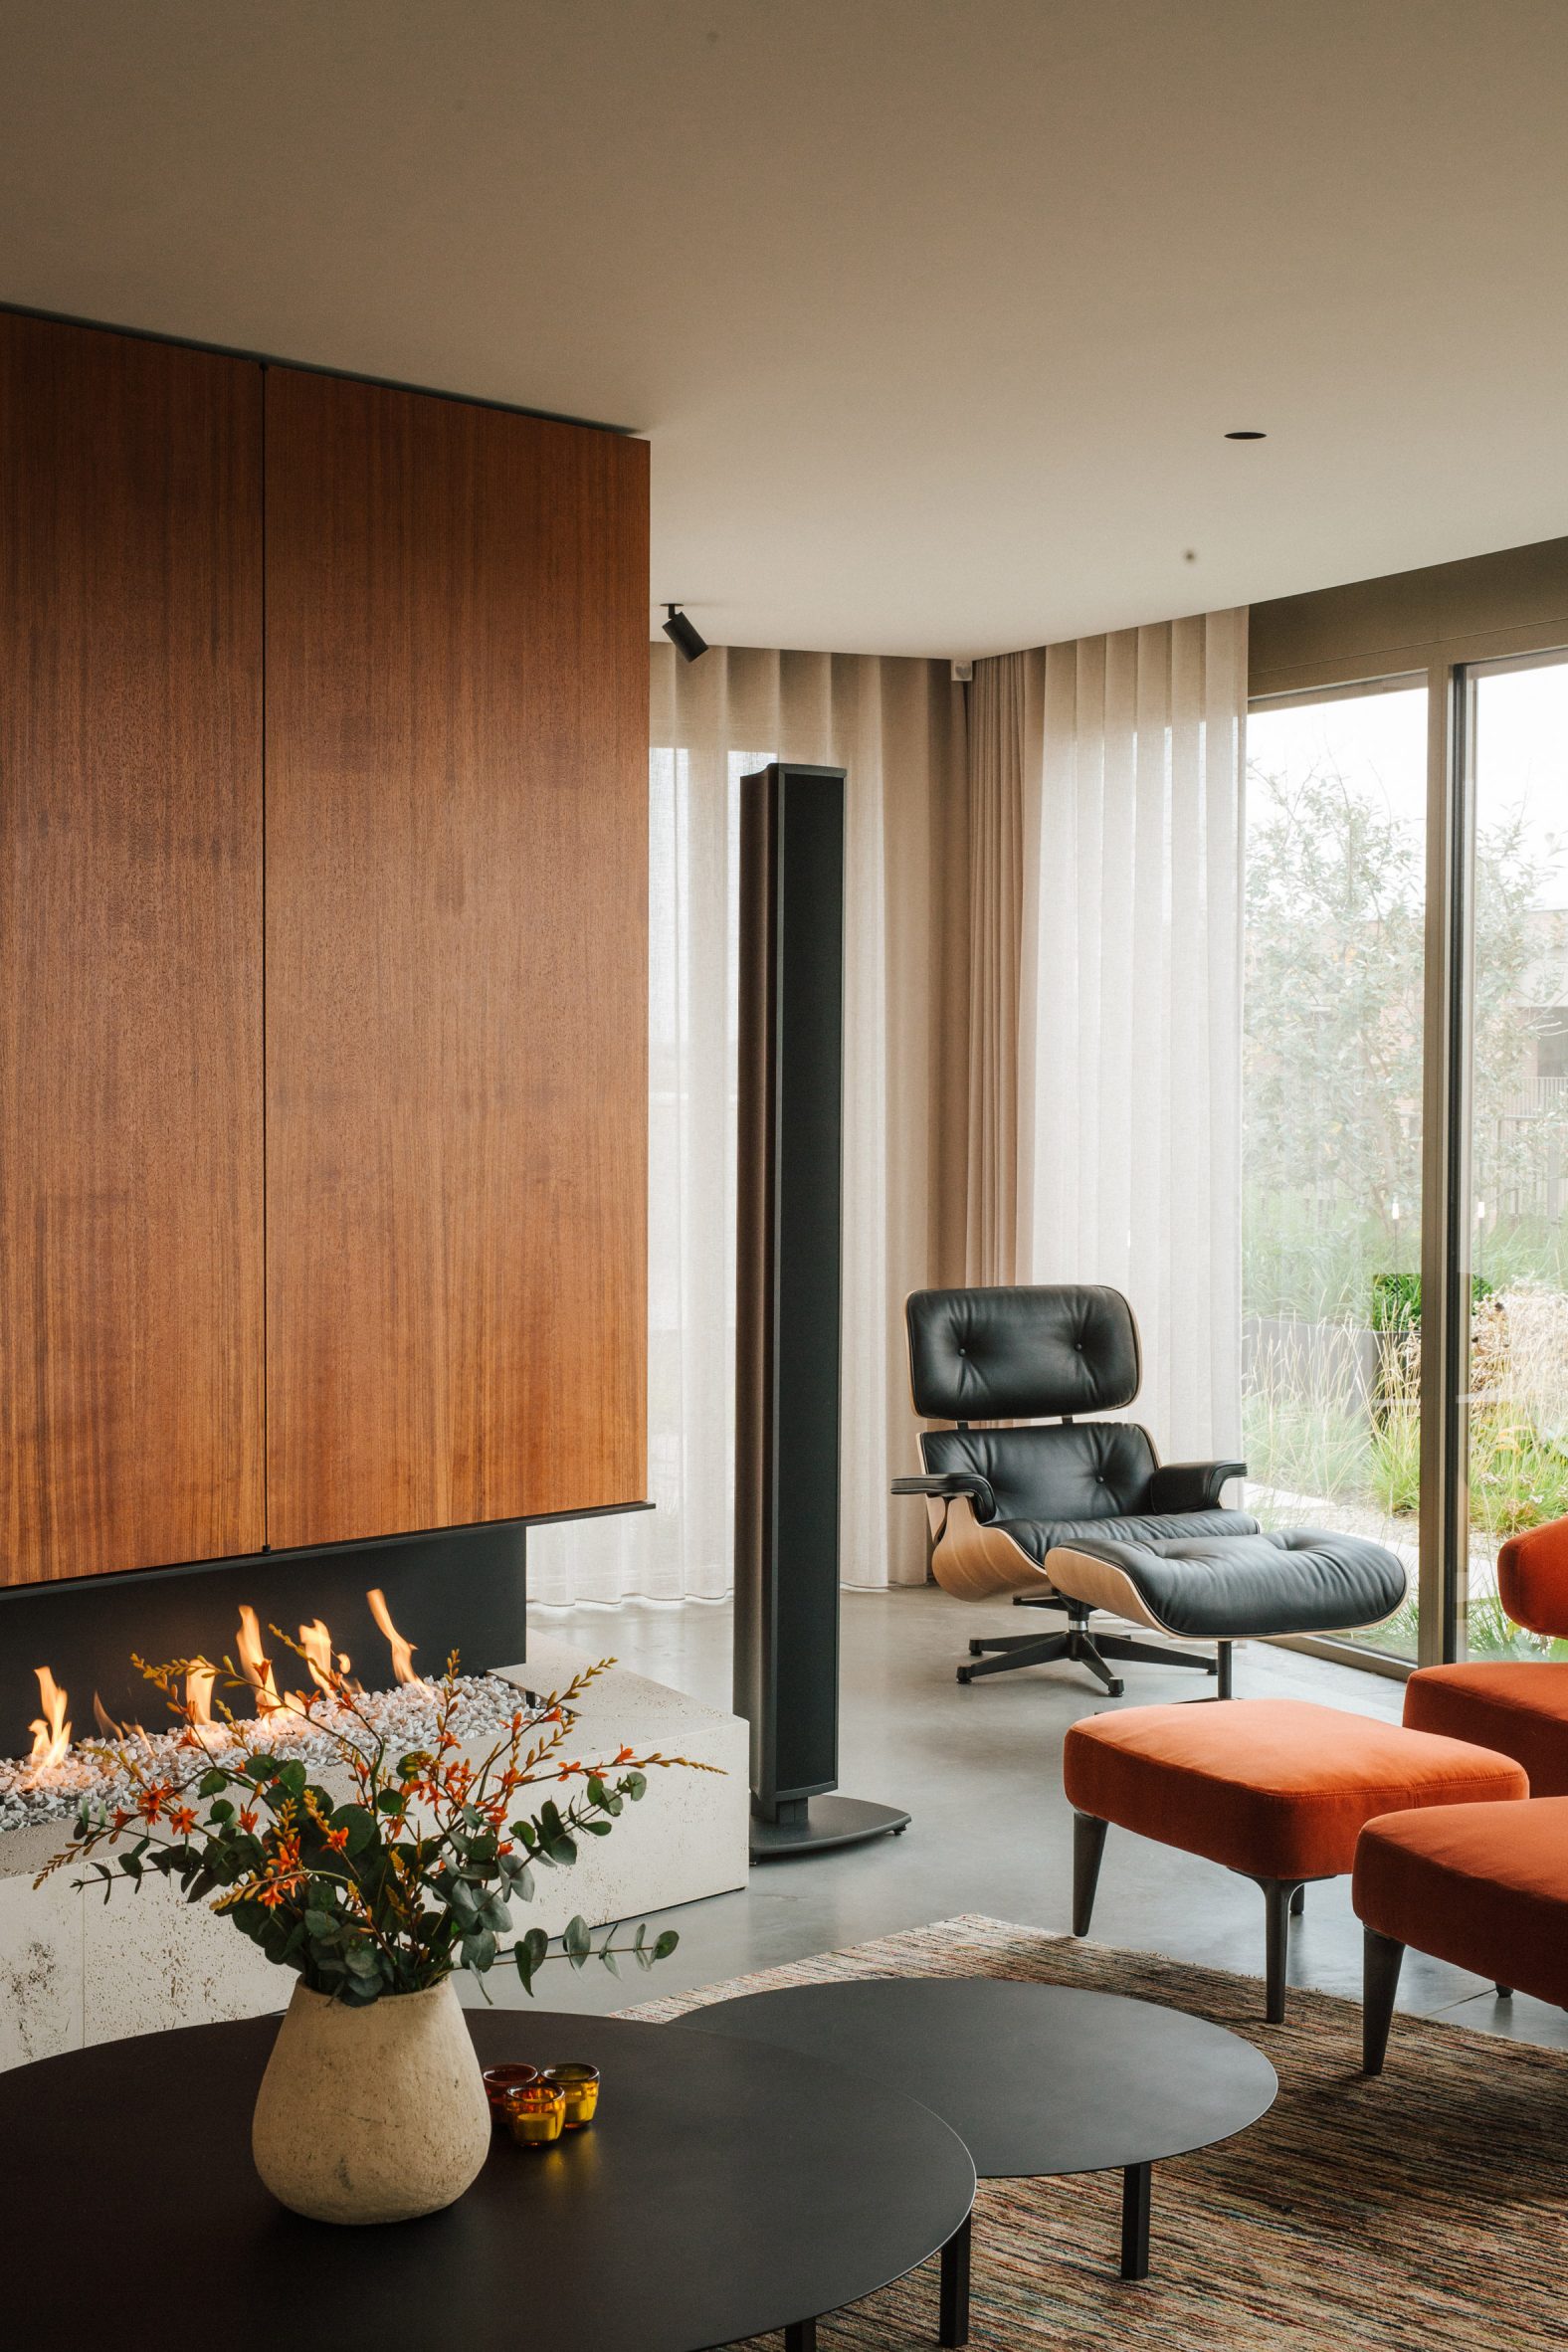 A fireplace was clad in cherry wood veneer in this penthouse